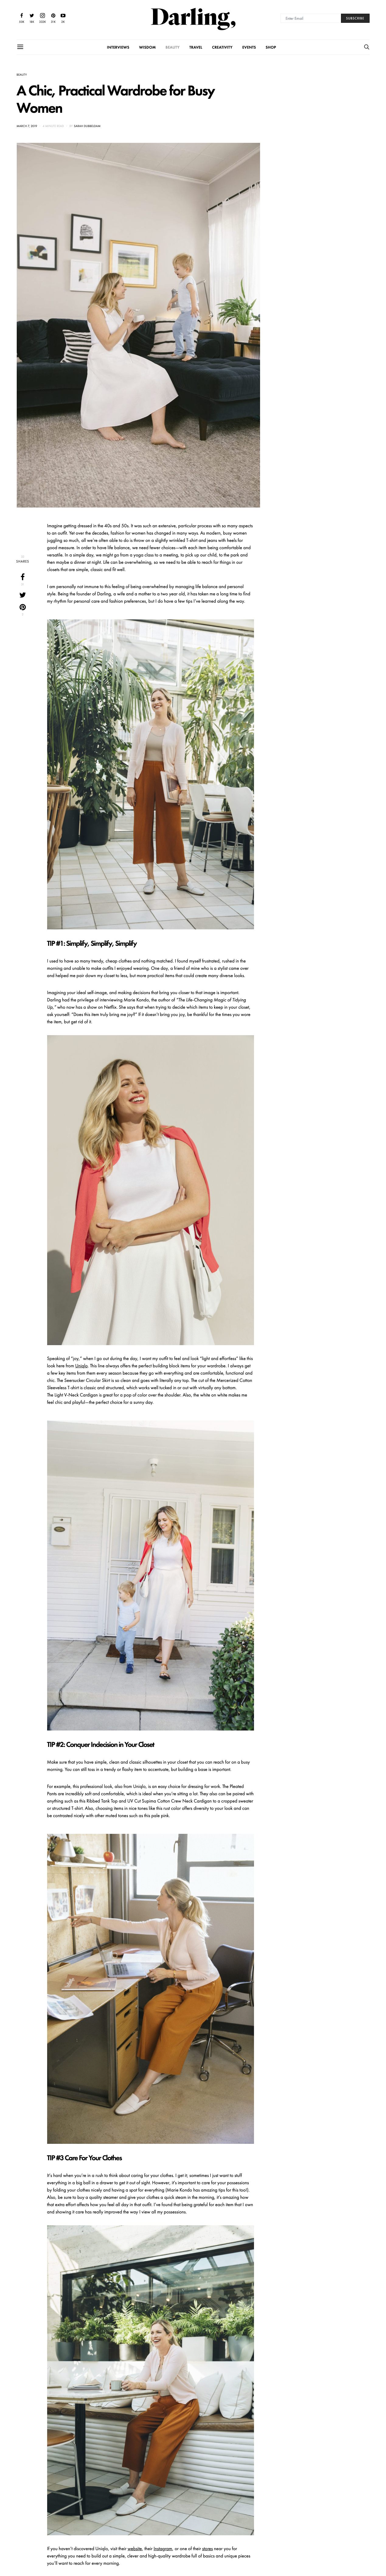 screencapture-darlingmagazine-org-a-chic-practical-wardrobe-for-busy-women-2019-06-20-19_31_34.png